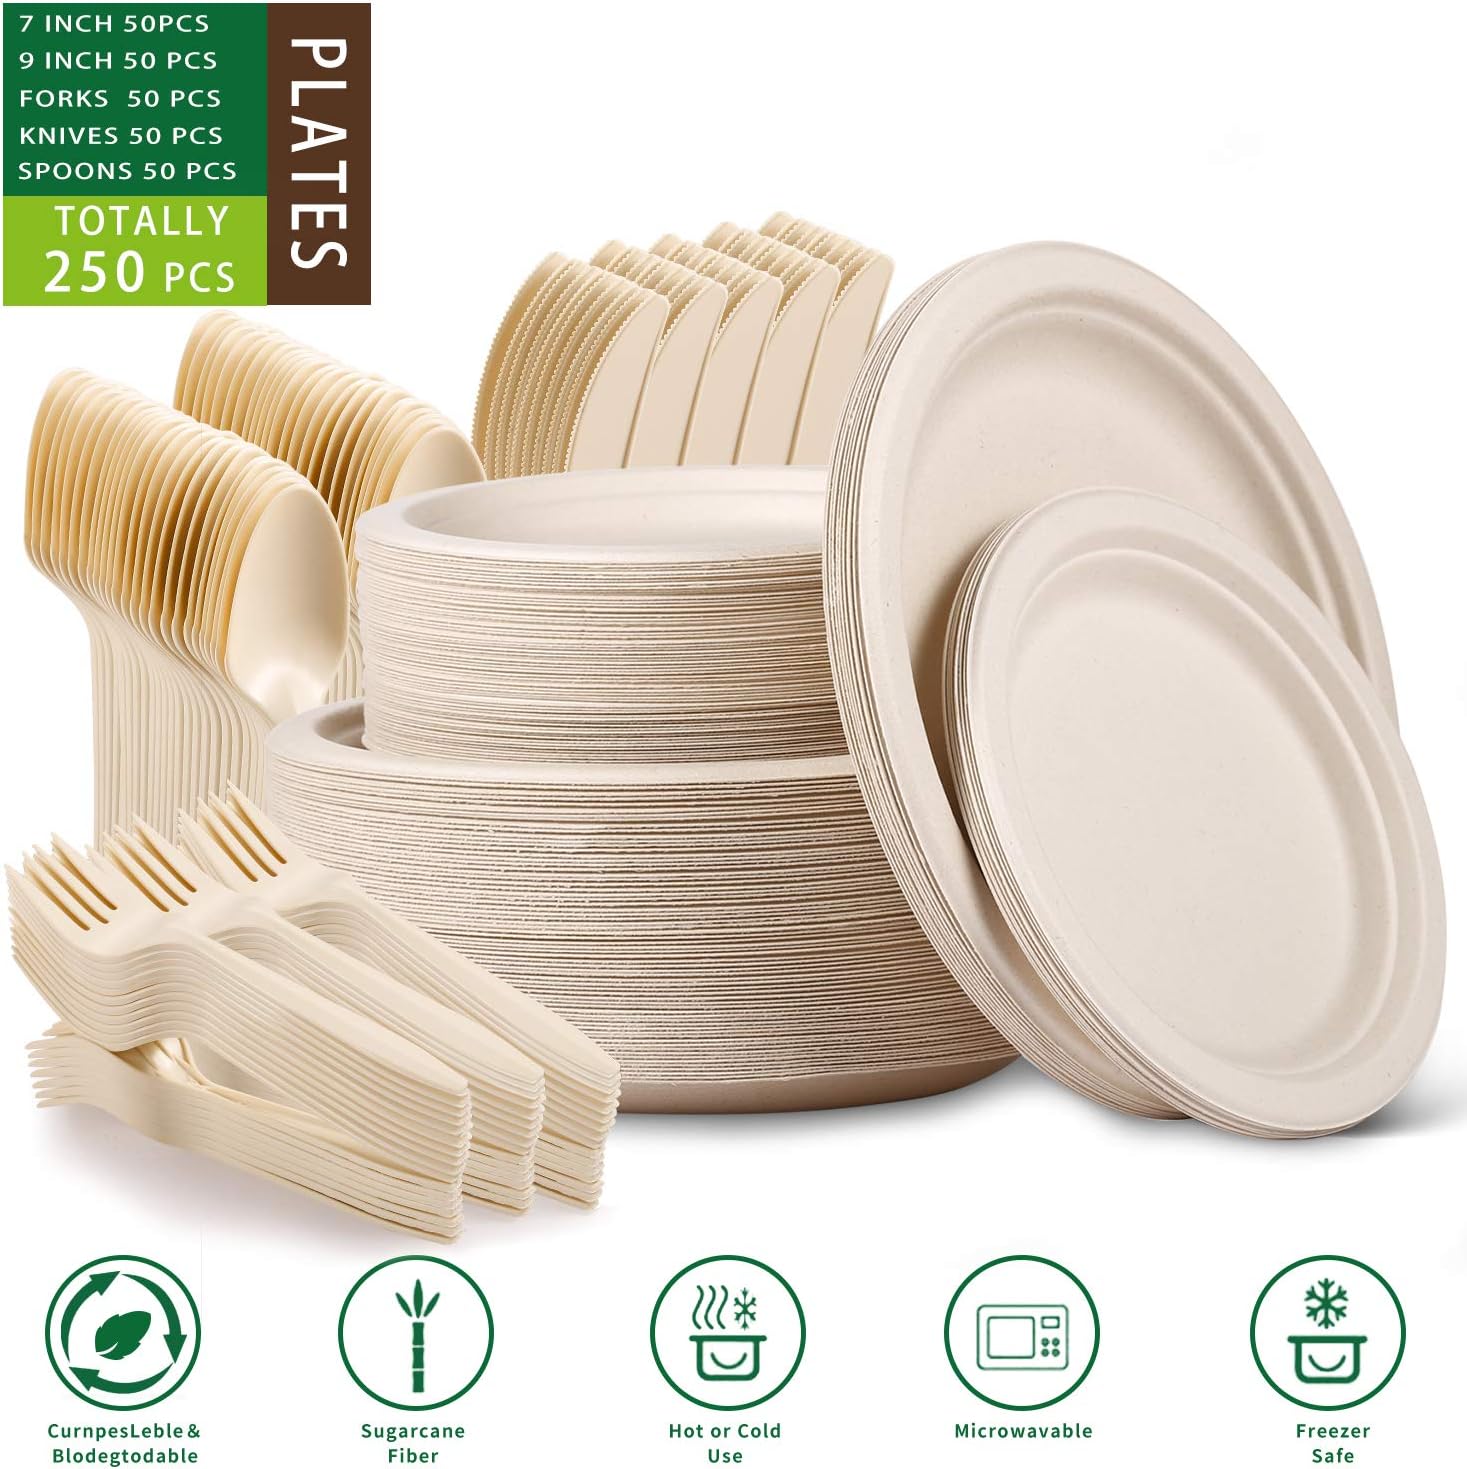 https://bigbigmart.com/wp-content/uploads/2023/09/Heavy-Duty-Paper-Plates-Set-for-Dinner-Sugarcane-Disposable-Eco9-Inch-and-7-Inch-Party-PlatesForksKnives-and-Spoons-Set-for-50-People-250-PCS1.jpg